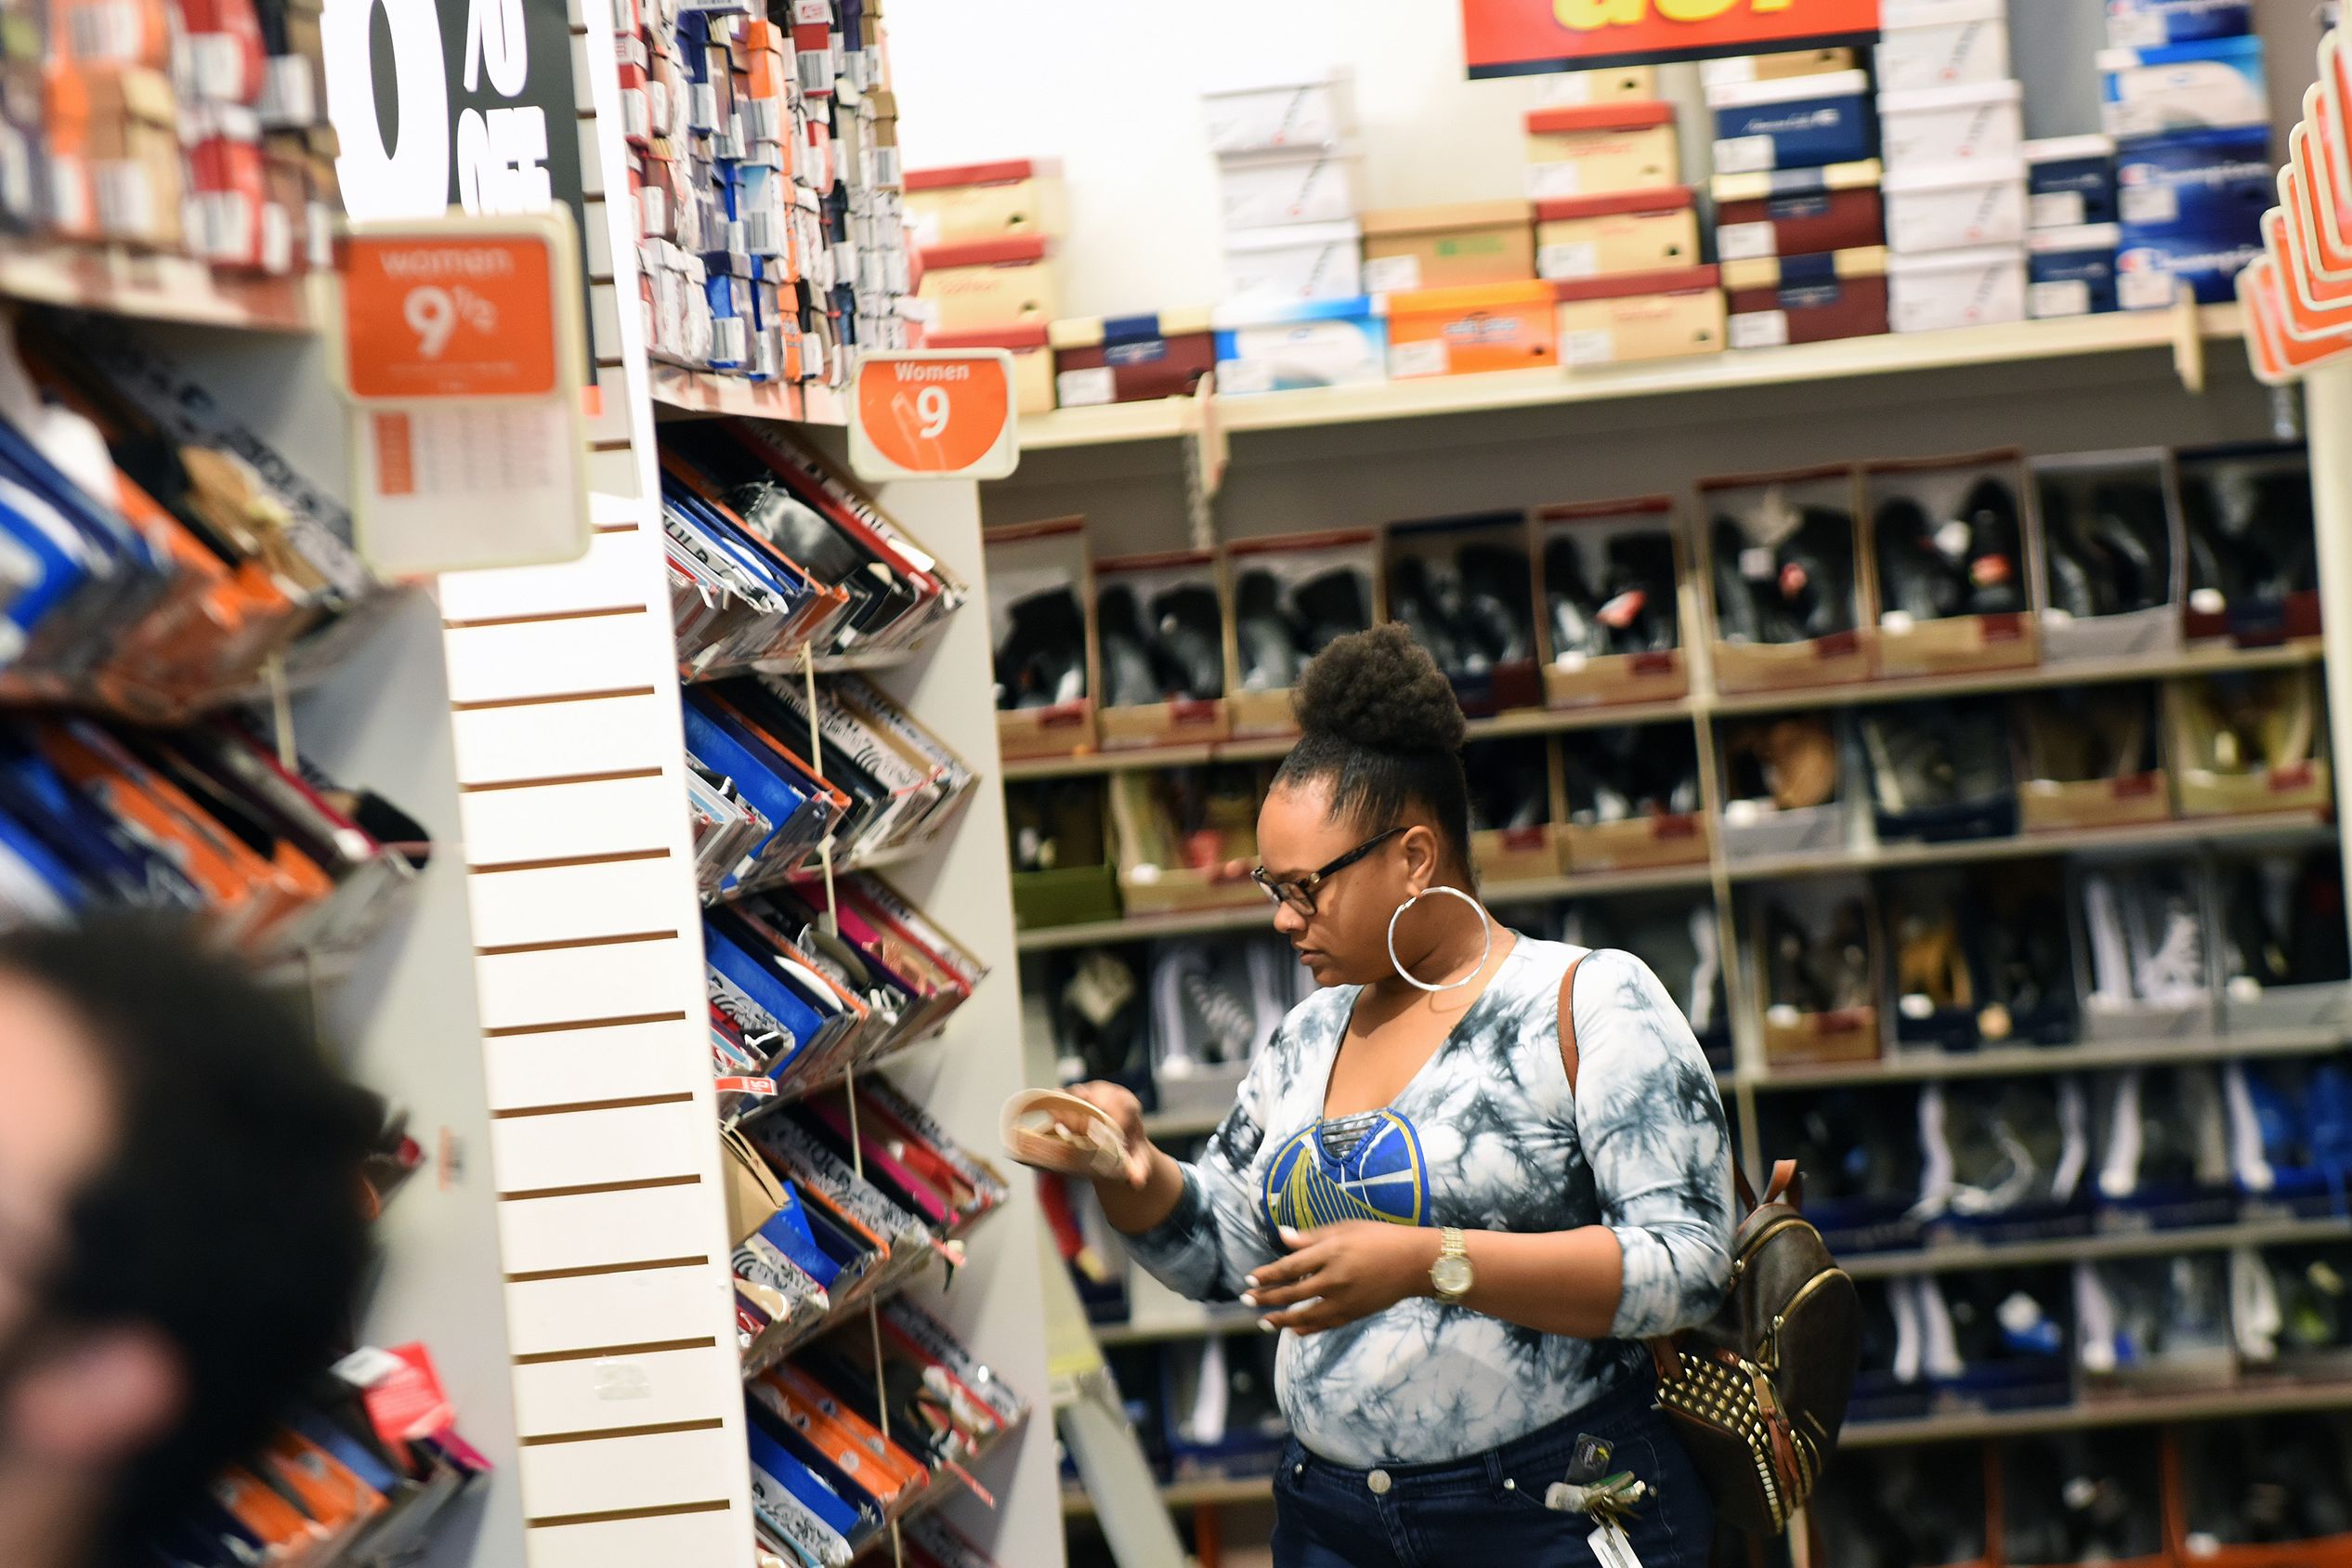 Payless files for a second, and final, bankruptcy | CNN Business